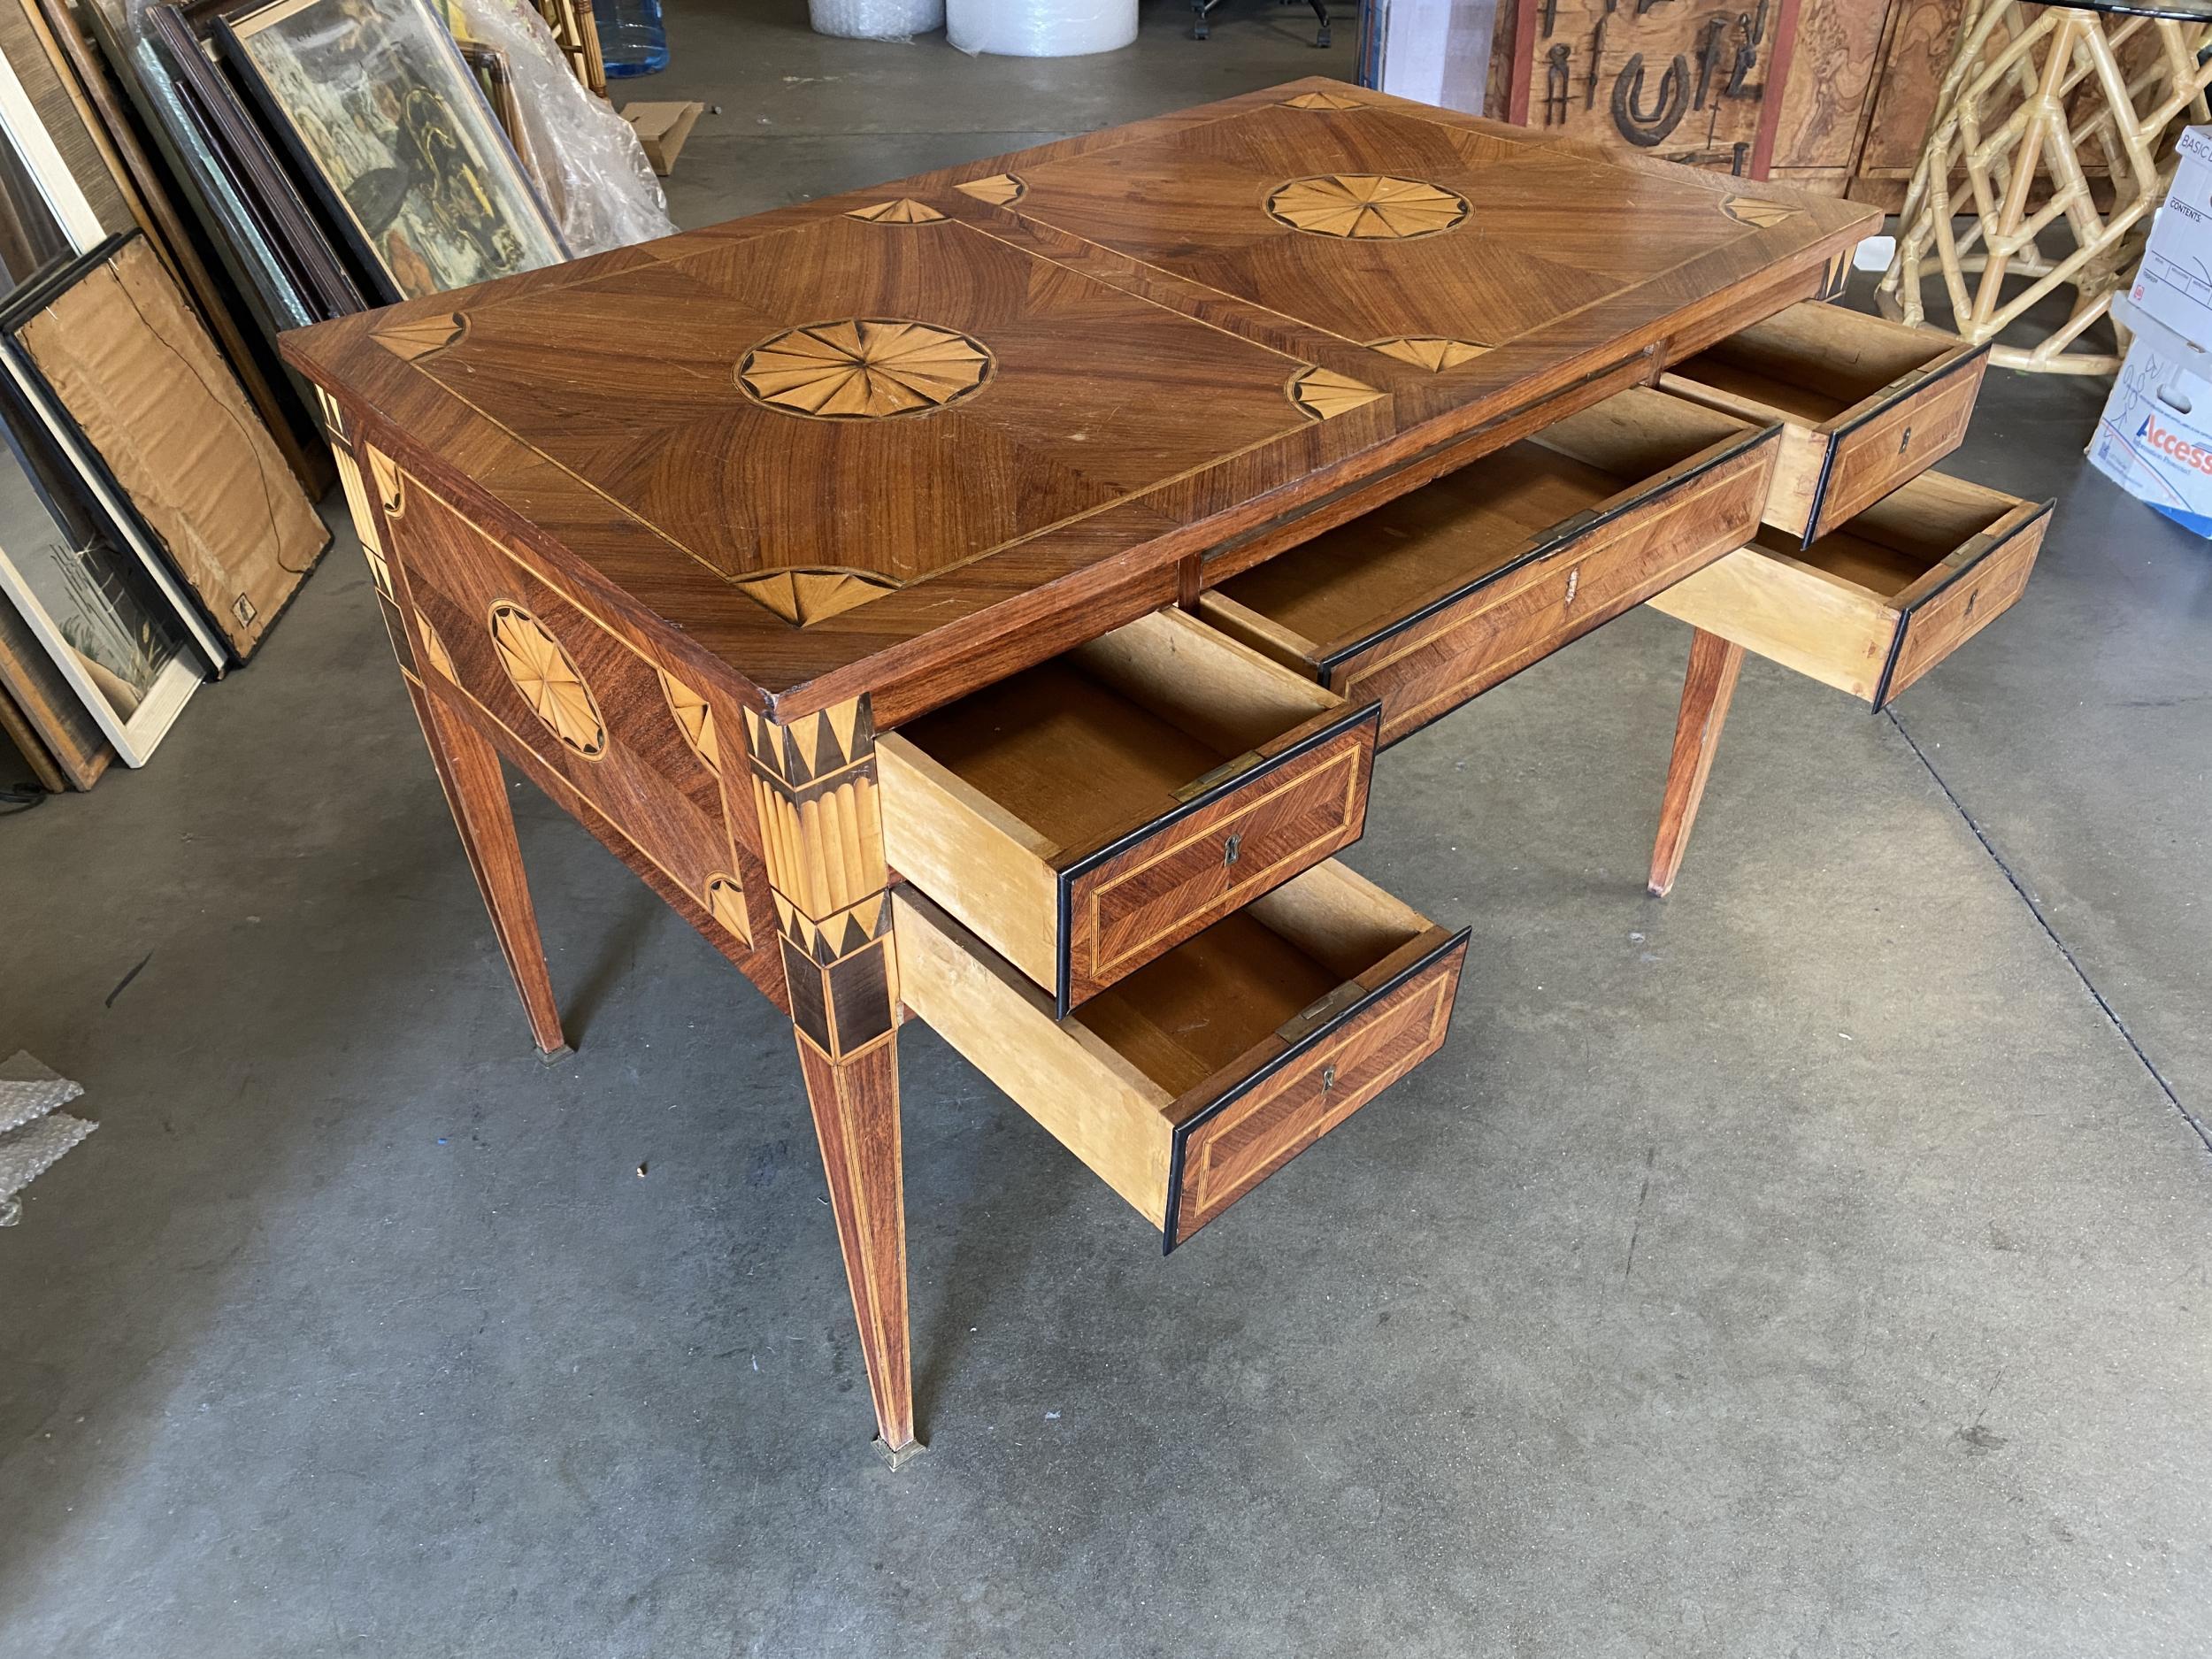 An exceptional French parquetry inlaid writing table with art deco designs, inlay with satinwood, black walnut, and geometric patterns. Having a single center drawer with 4 side drawers, and supported on tapering legs.

 